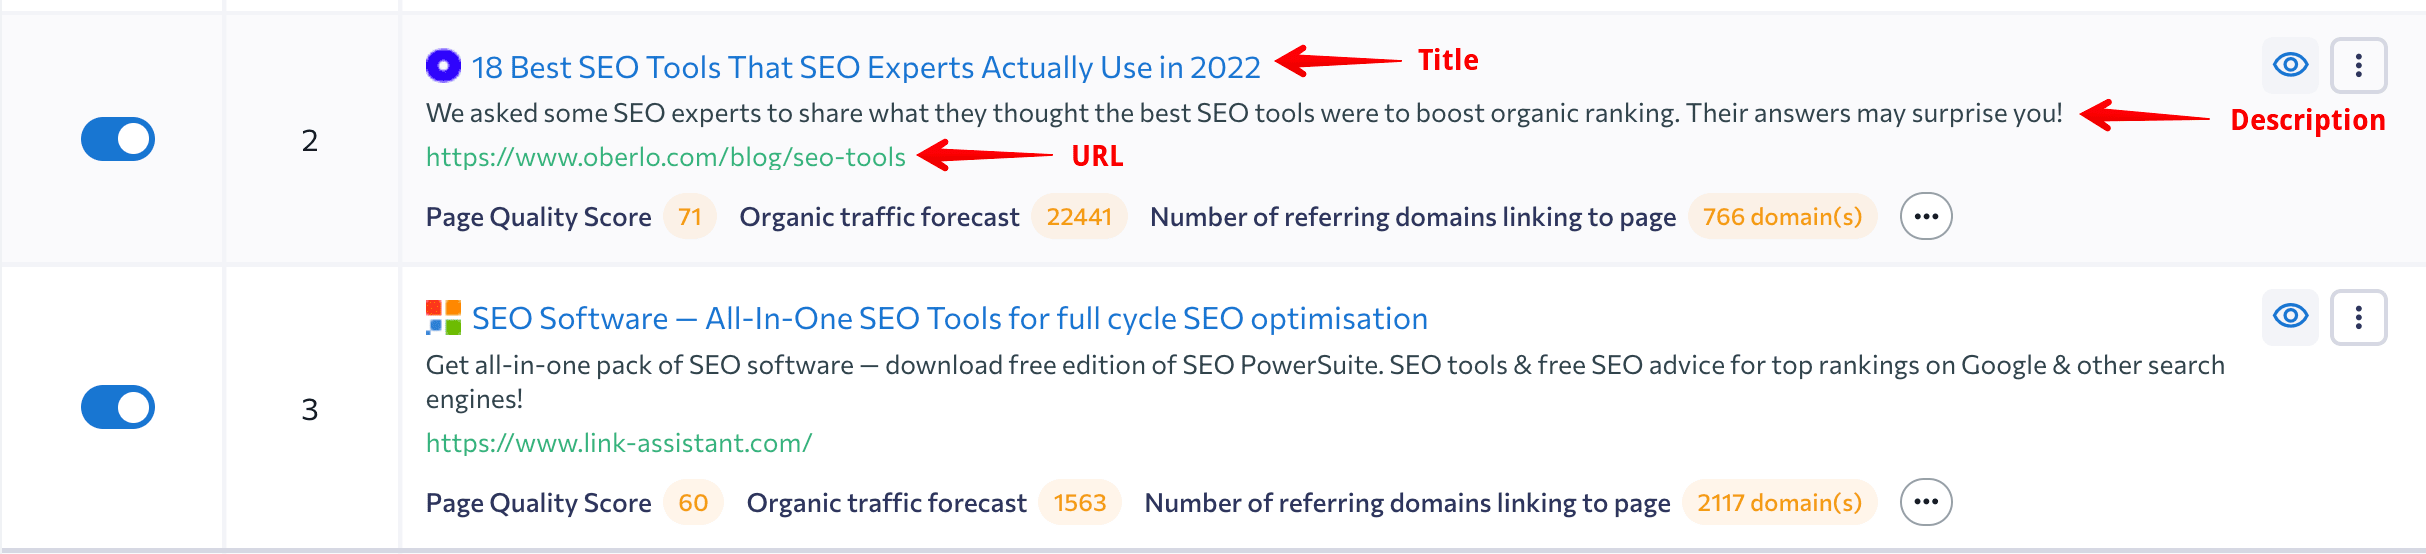 SERP snippet with a page title, description, and URL